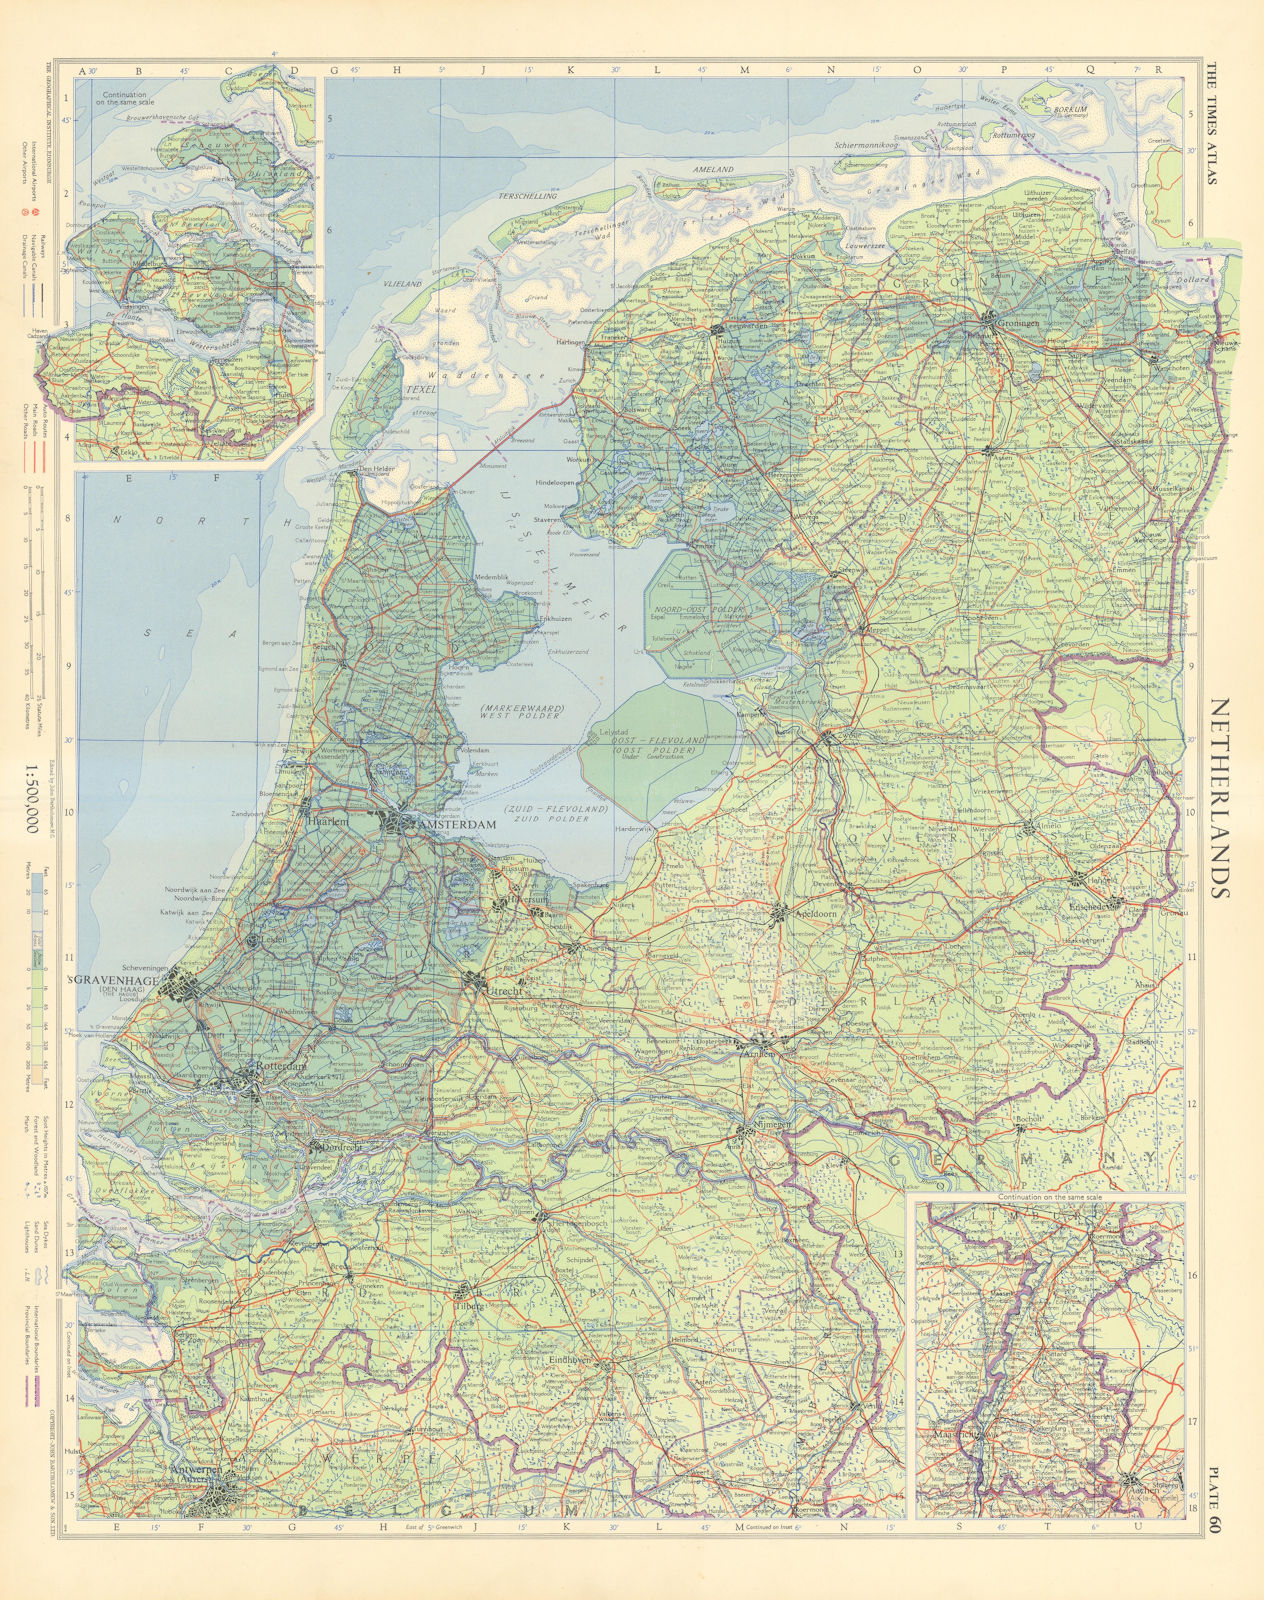 Netherlands showing polders under construction & below sea level. TIMES 1955 map